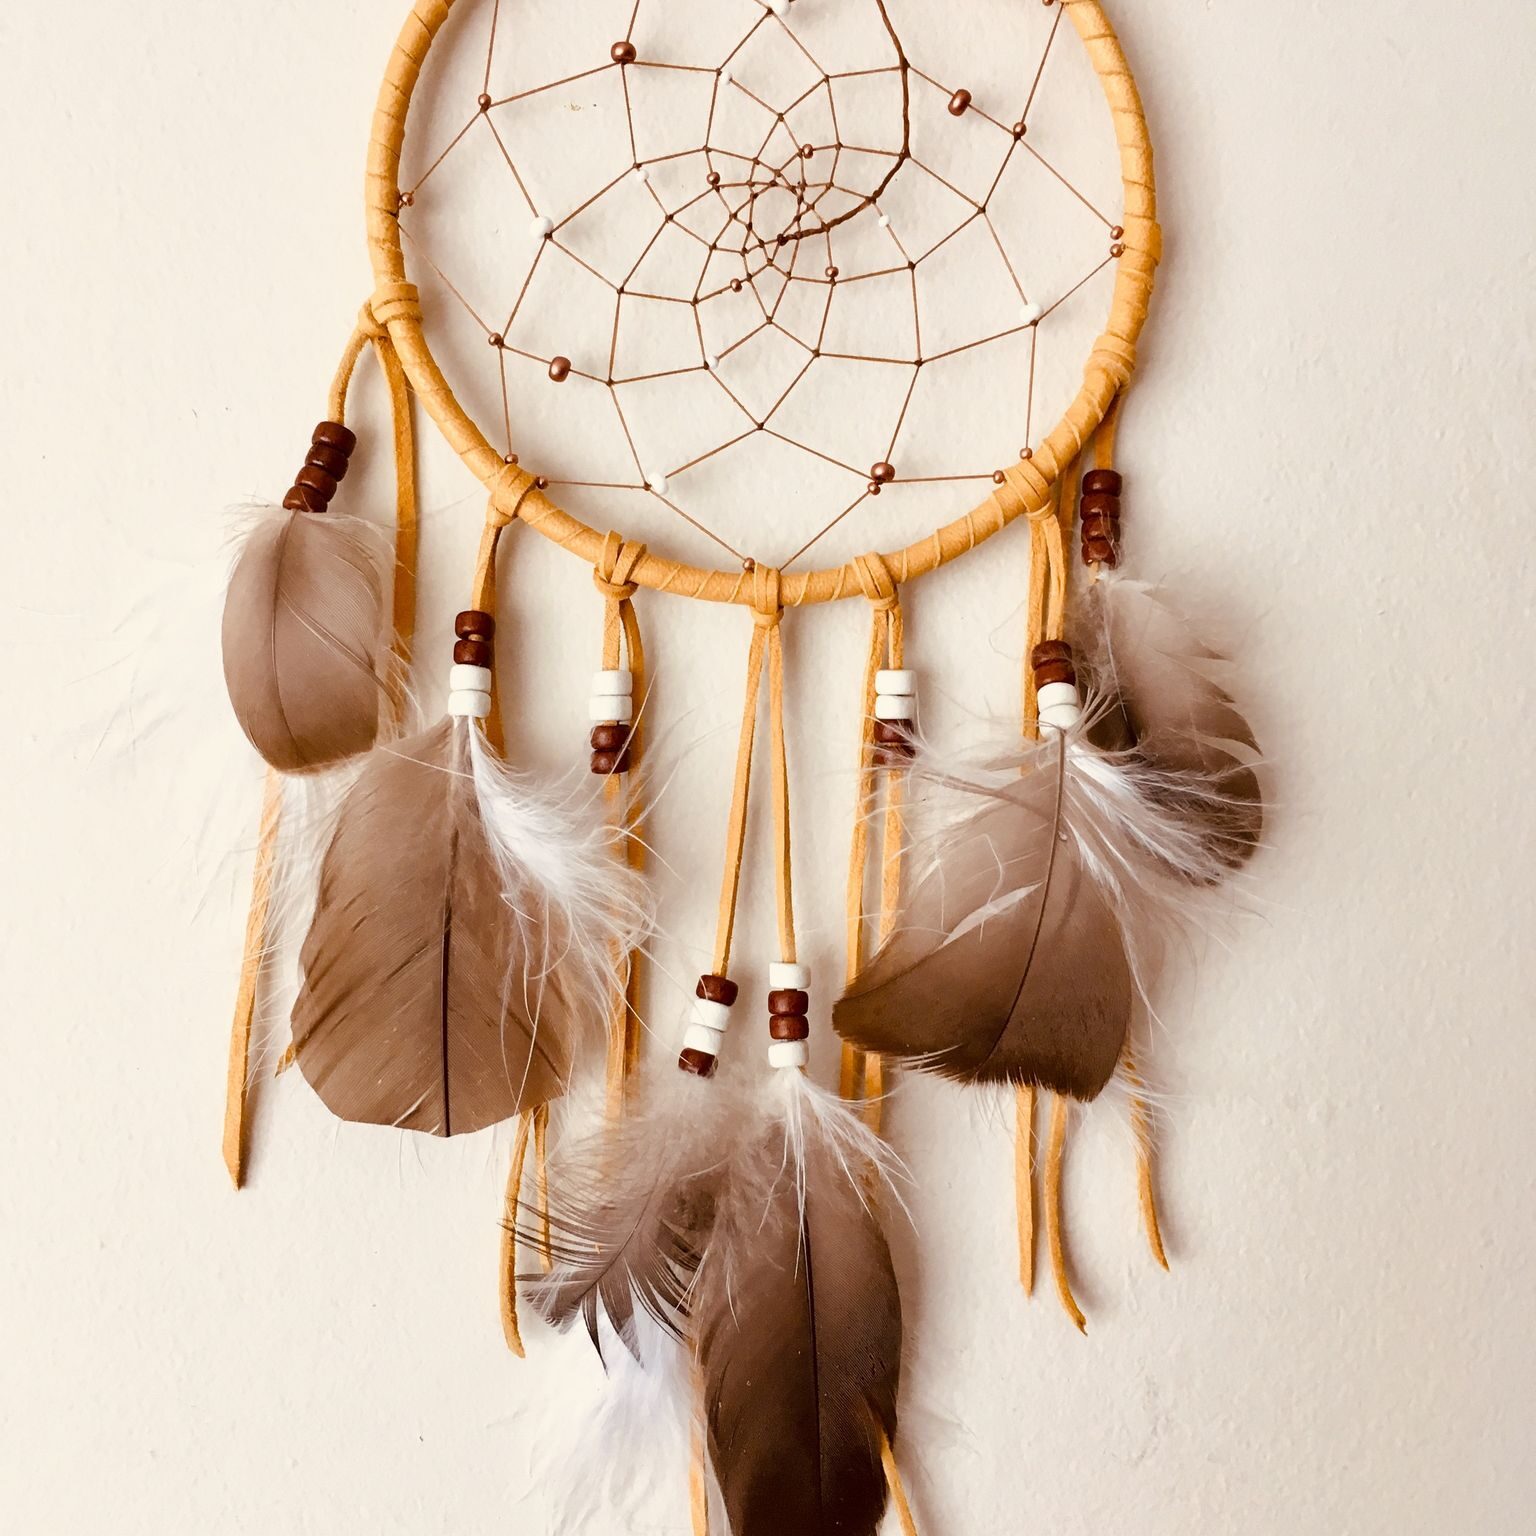 Jill Simser, beader, beadwork, craft maker, crafts, leatherwork, dreamcatchers, moccasins, earrings, barrettes, Indigenous Artist, First Nations, Indigenous Arts Collective of Canada, Pass The Feather